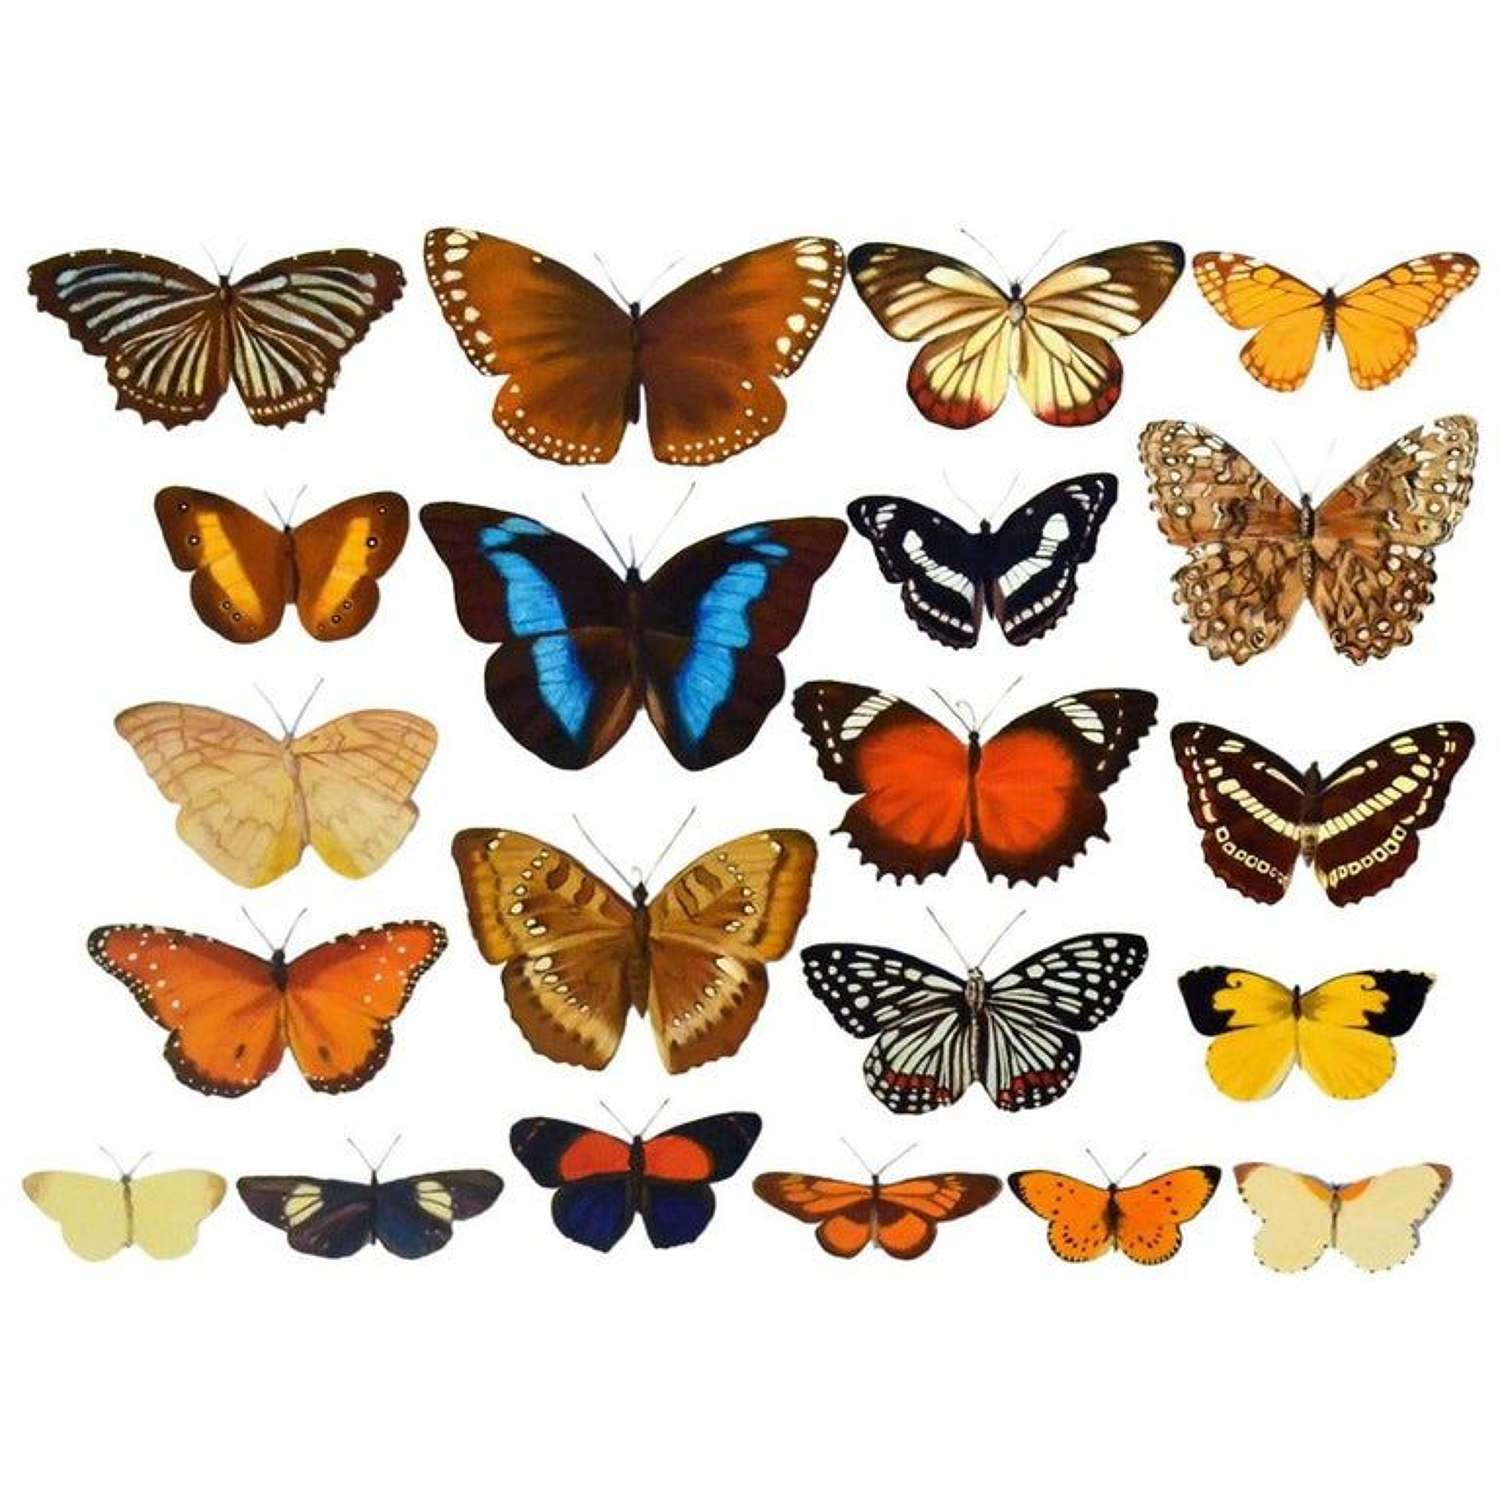 Photo Realistic Painting of Butterflies by Bridget Orlando